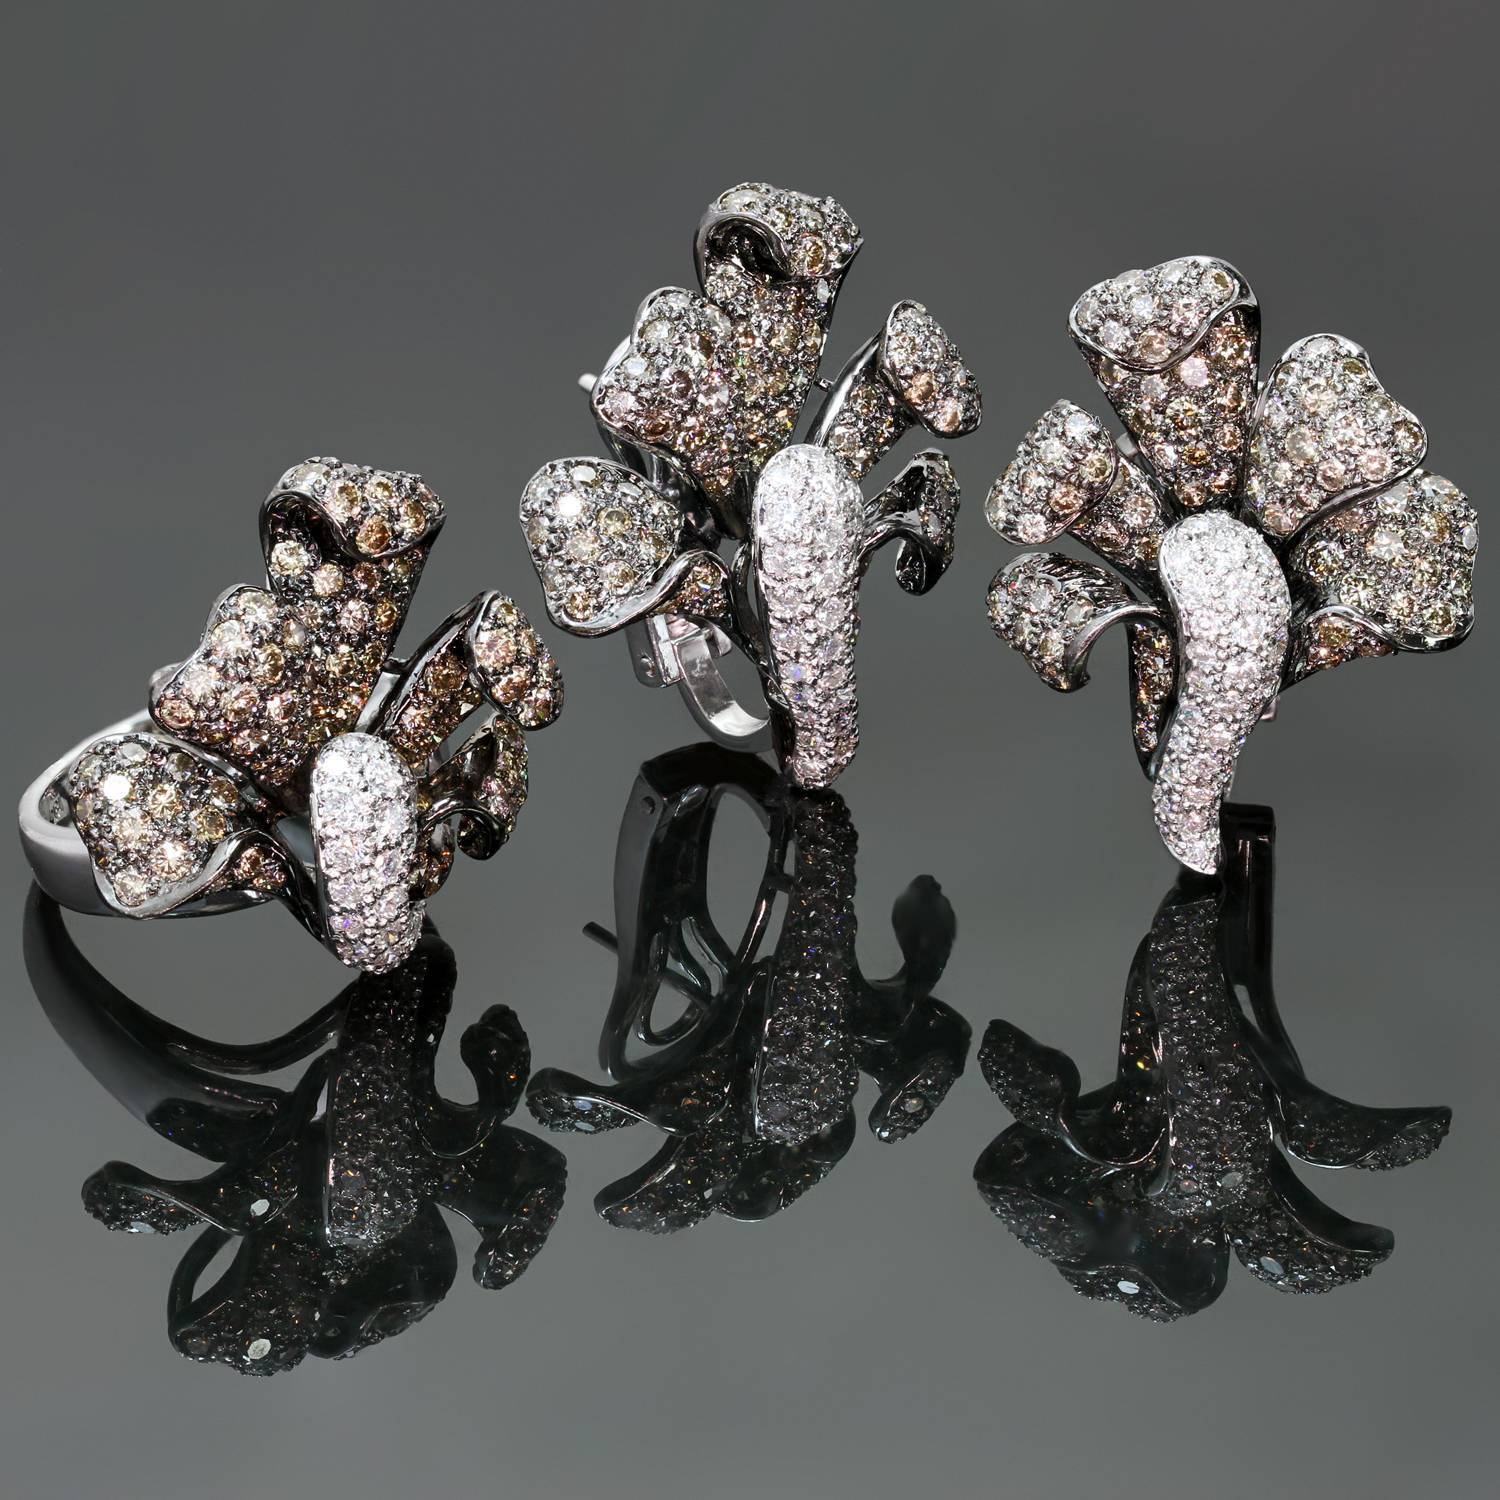 This absolutely stunning earrings & ring set features a sparkling flower-shaped design crafted in 18k white gold. The earrings have about 64 white diamonds of an estimated 1.60 carats and about 160 champagne diamonds of an estimated 6.40 carats.